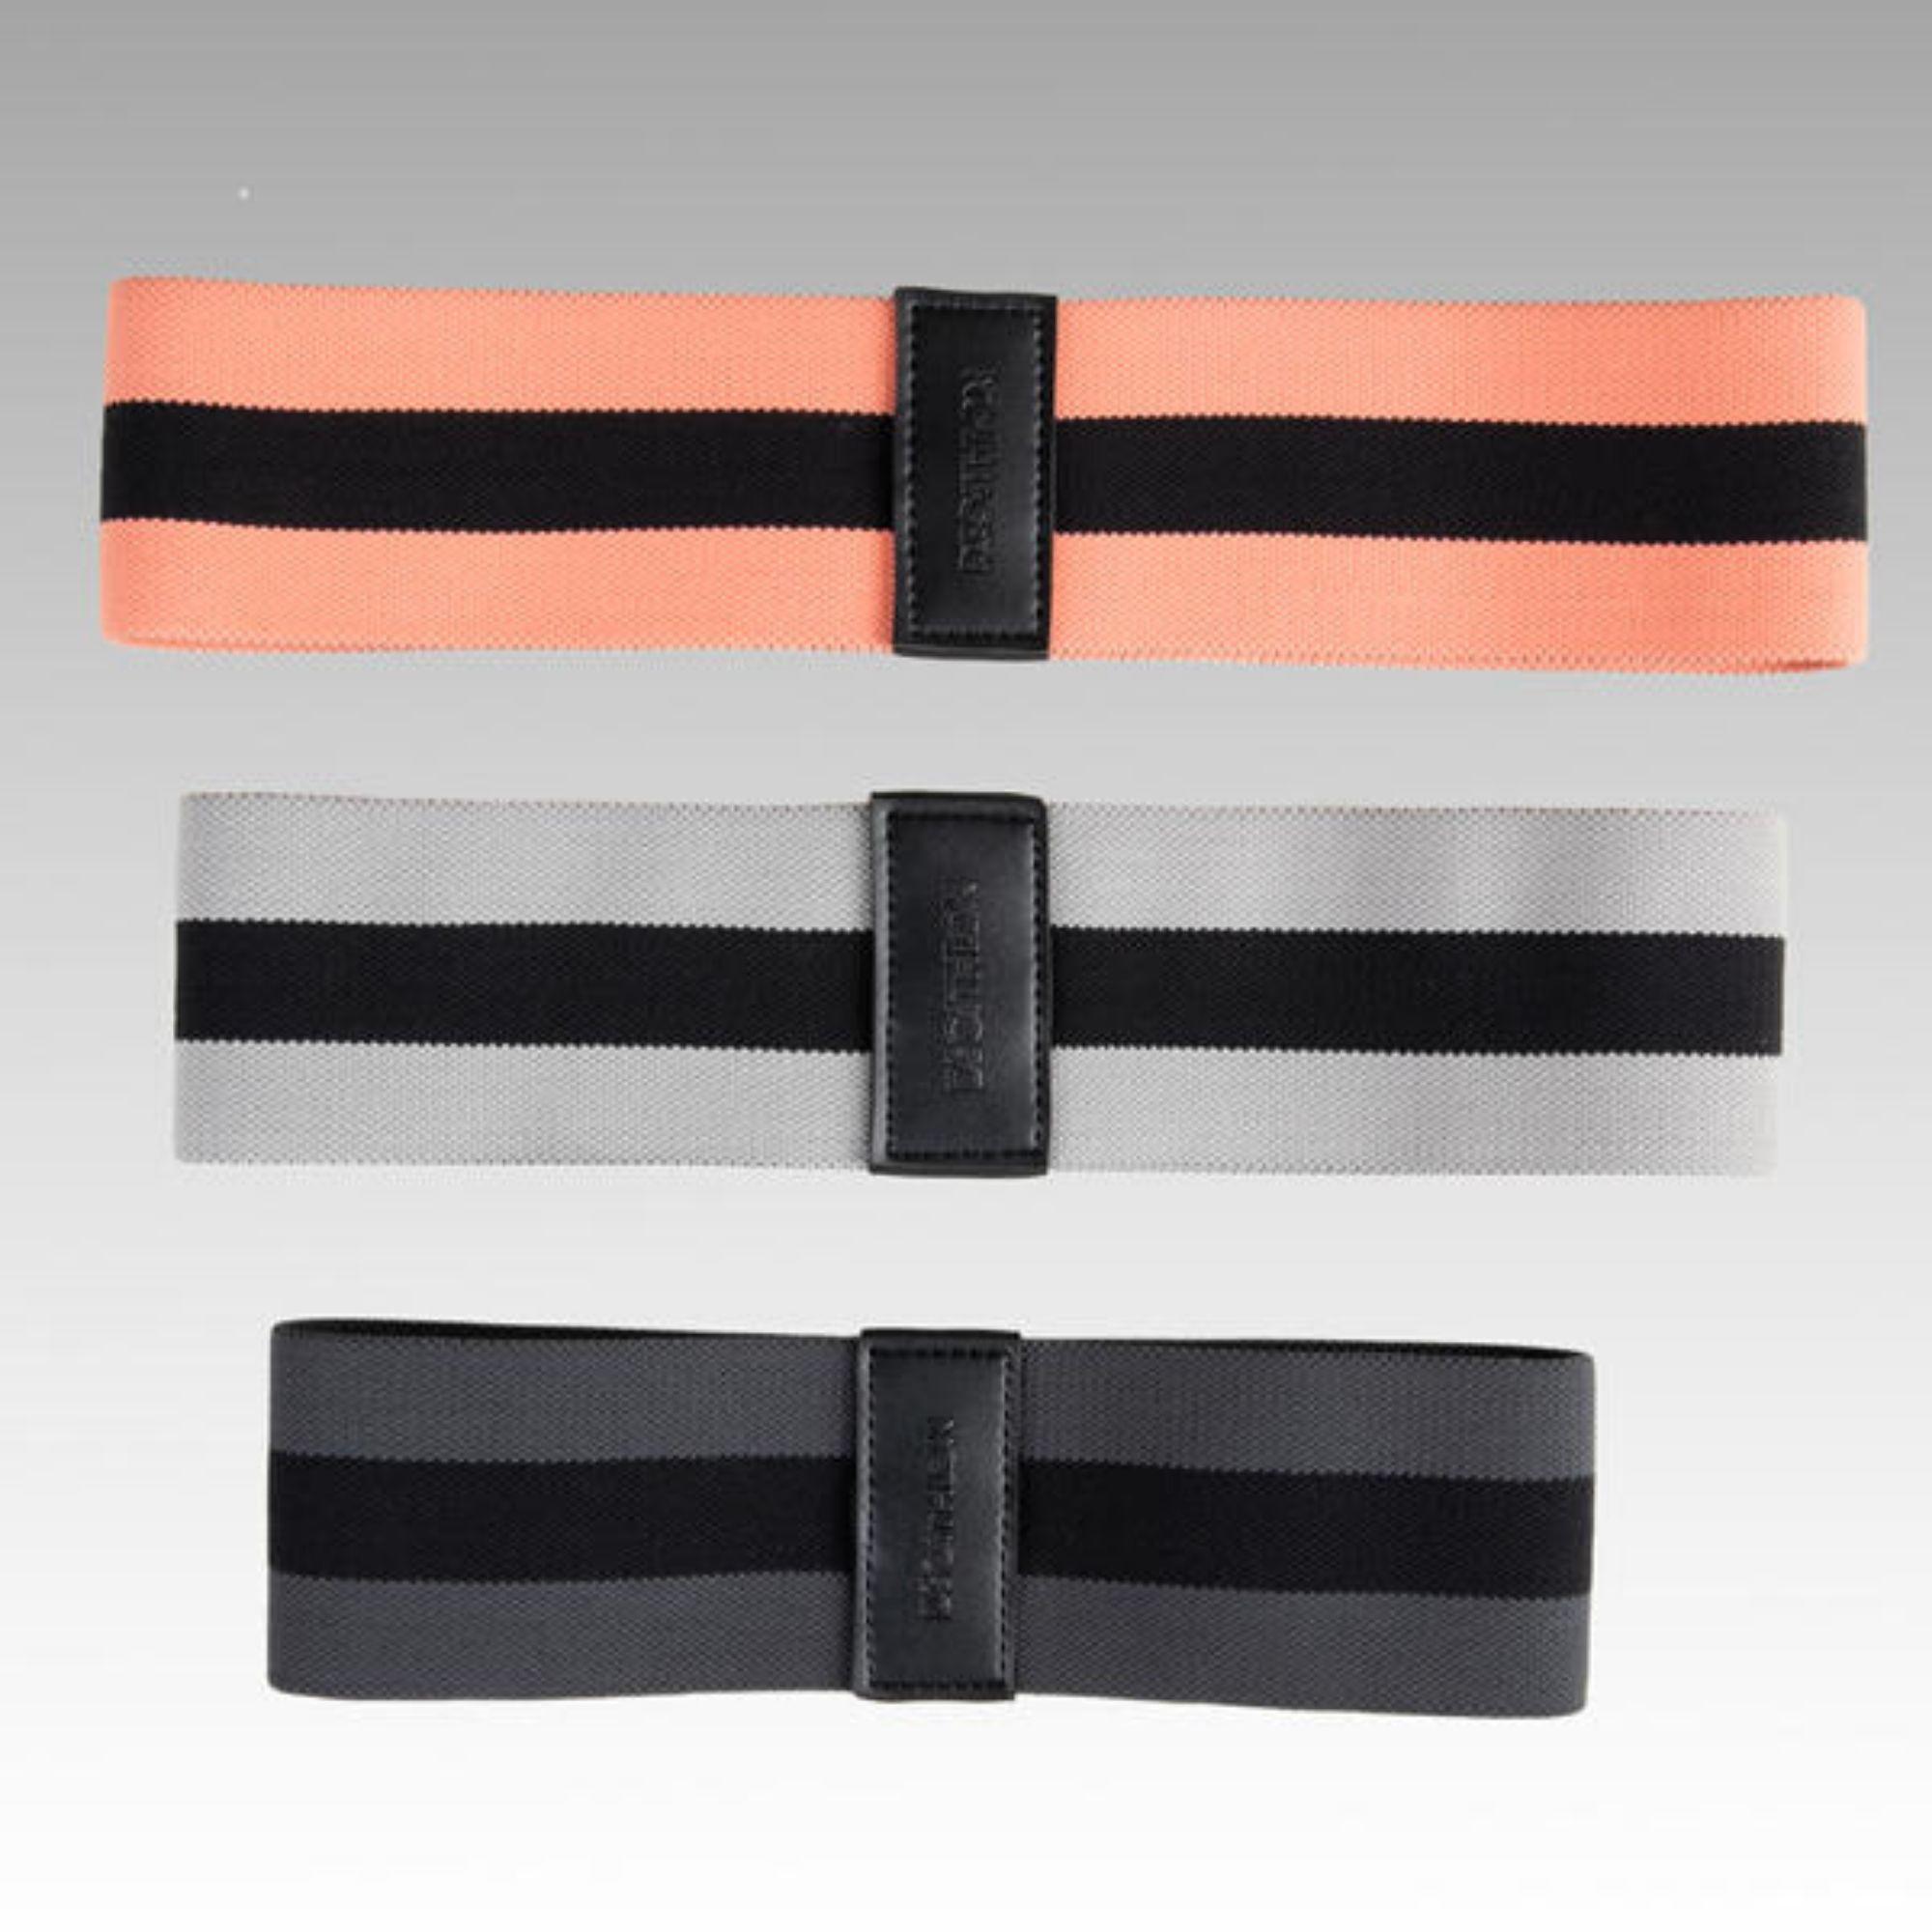 Strength Training Resistance Band Glute Band - Hard 9/10